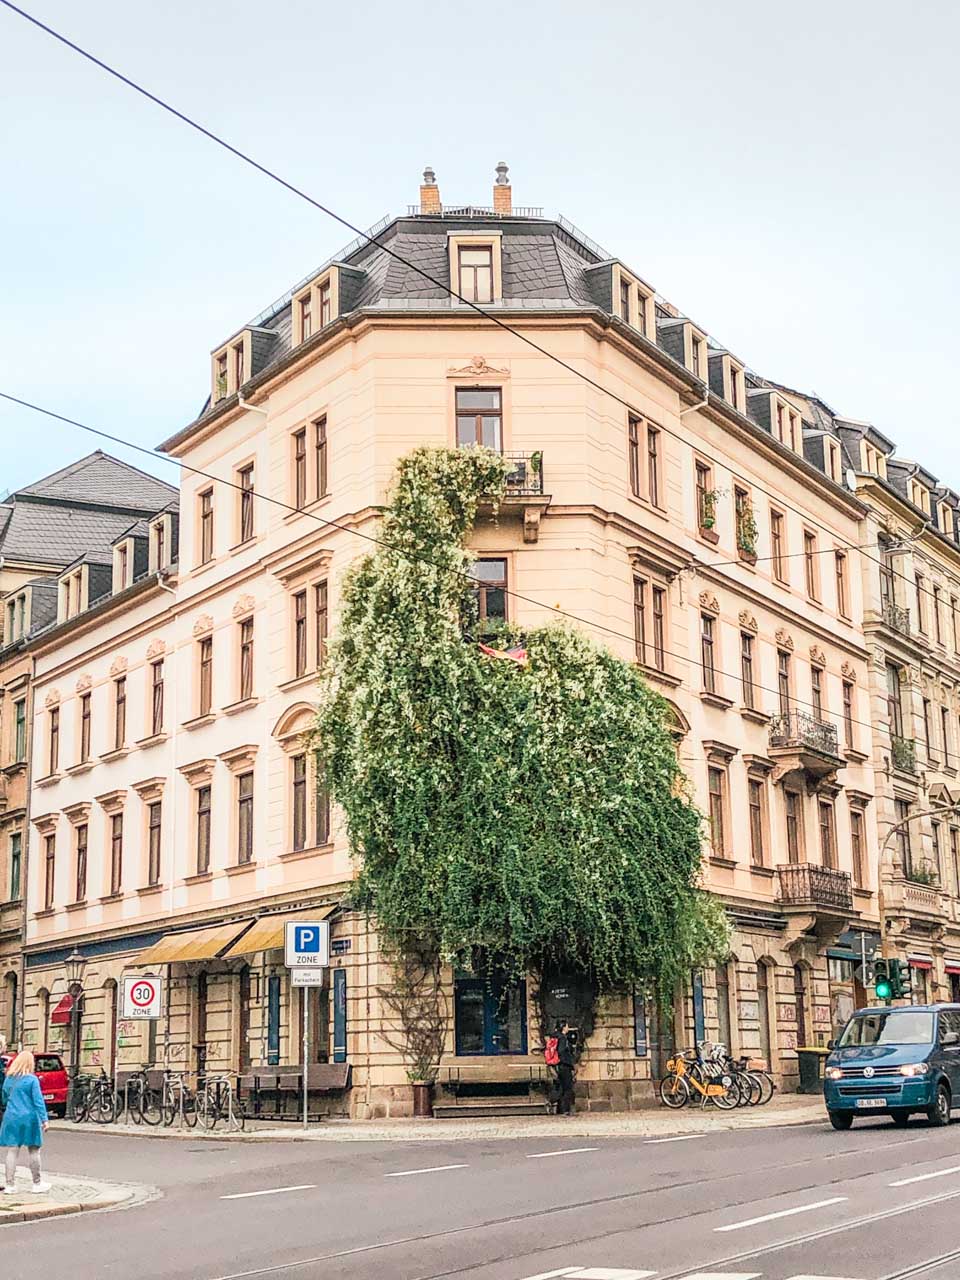 An ivy-covered building in the Neustadt area of Dresden, Germany